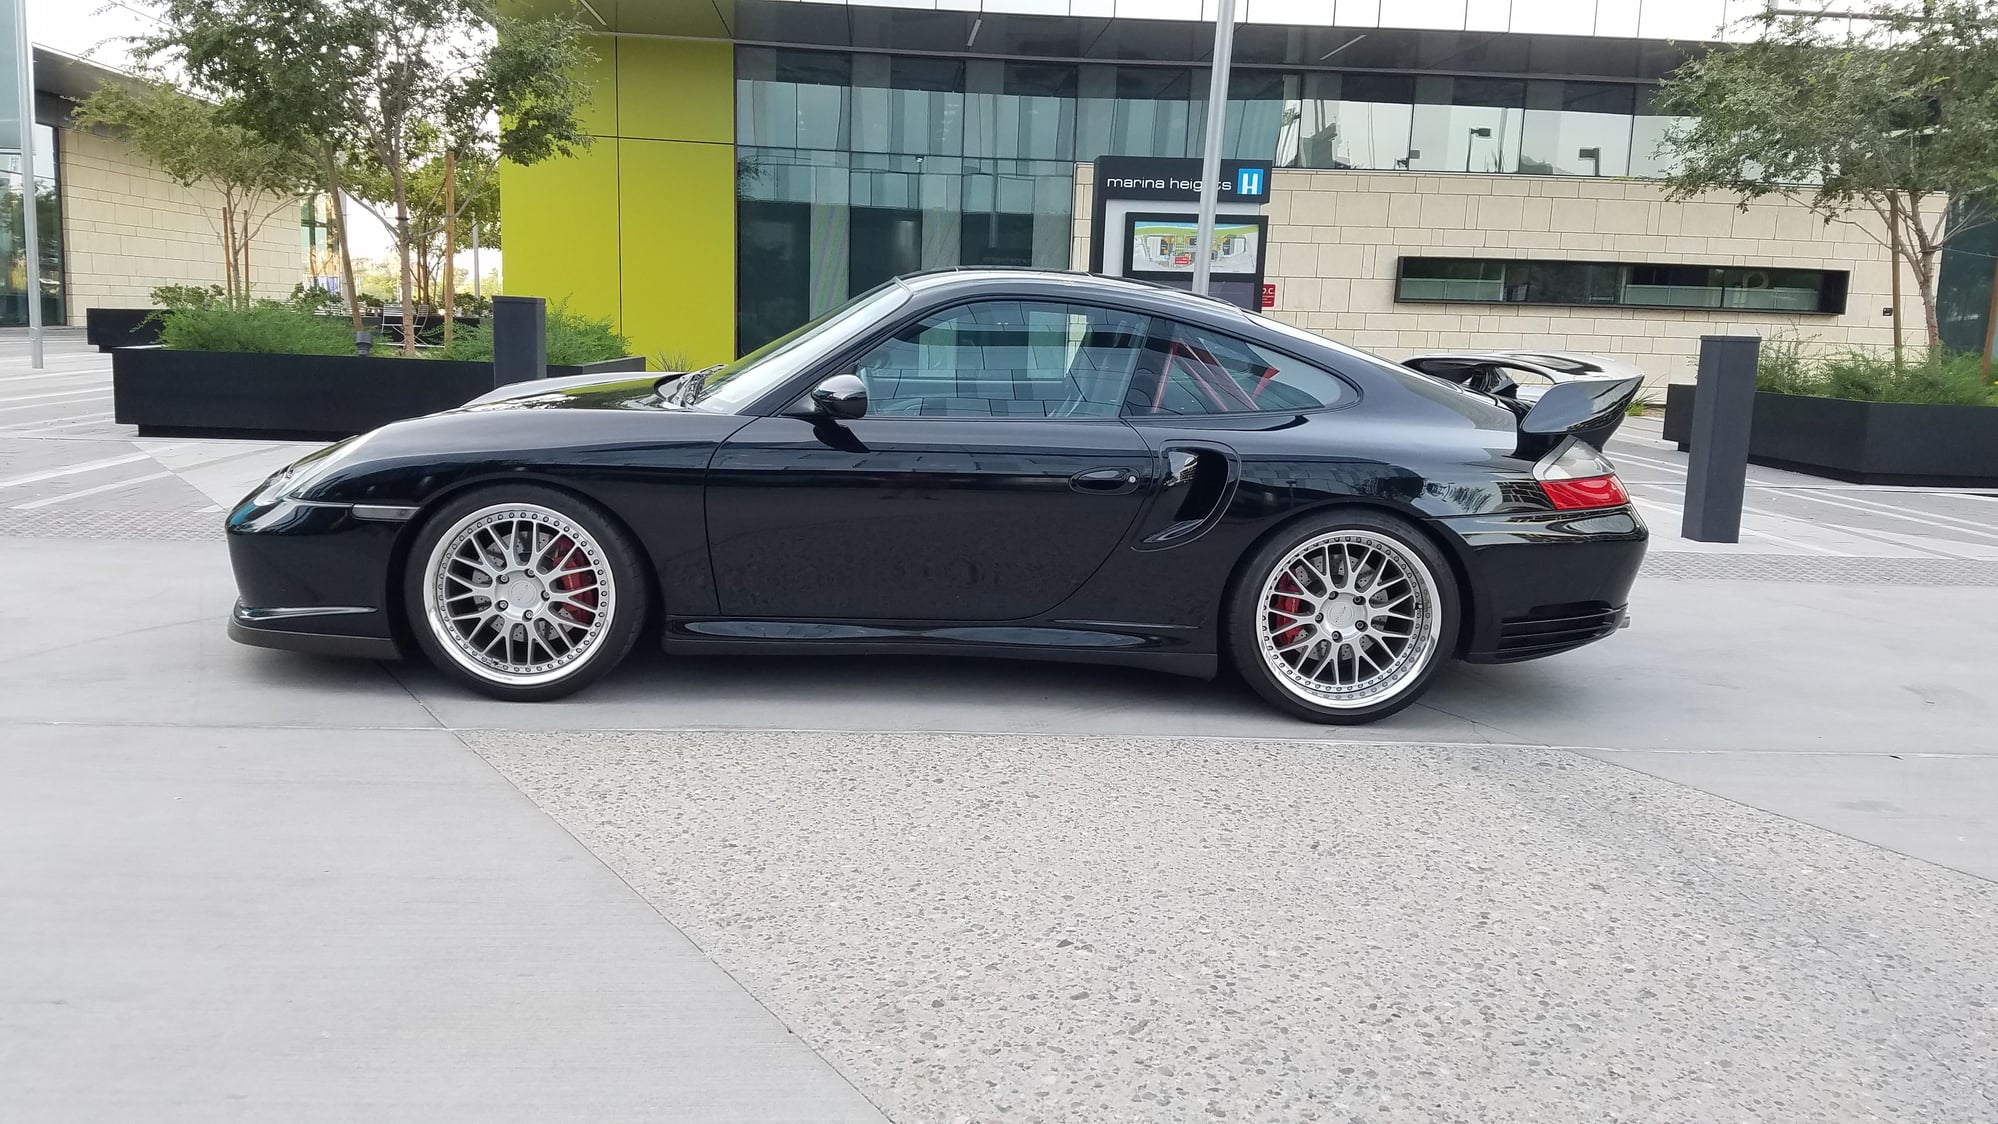 2001 Porsche 911 - 996 turbo with 6 speed in black - Used - VIN WP0AB29981S685740 - 59,000 Miles - 6 cyl - AWD - Manual - Coupe - Black - Tempe, AZ 85281, United States